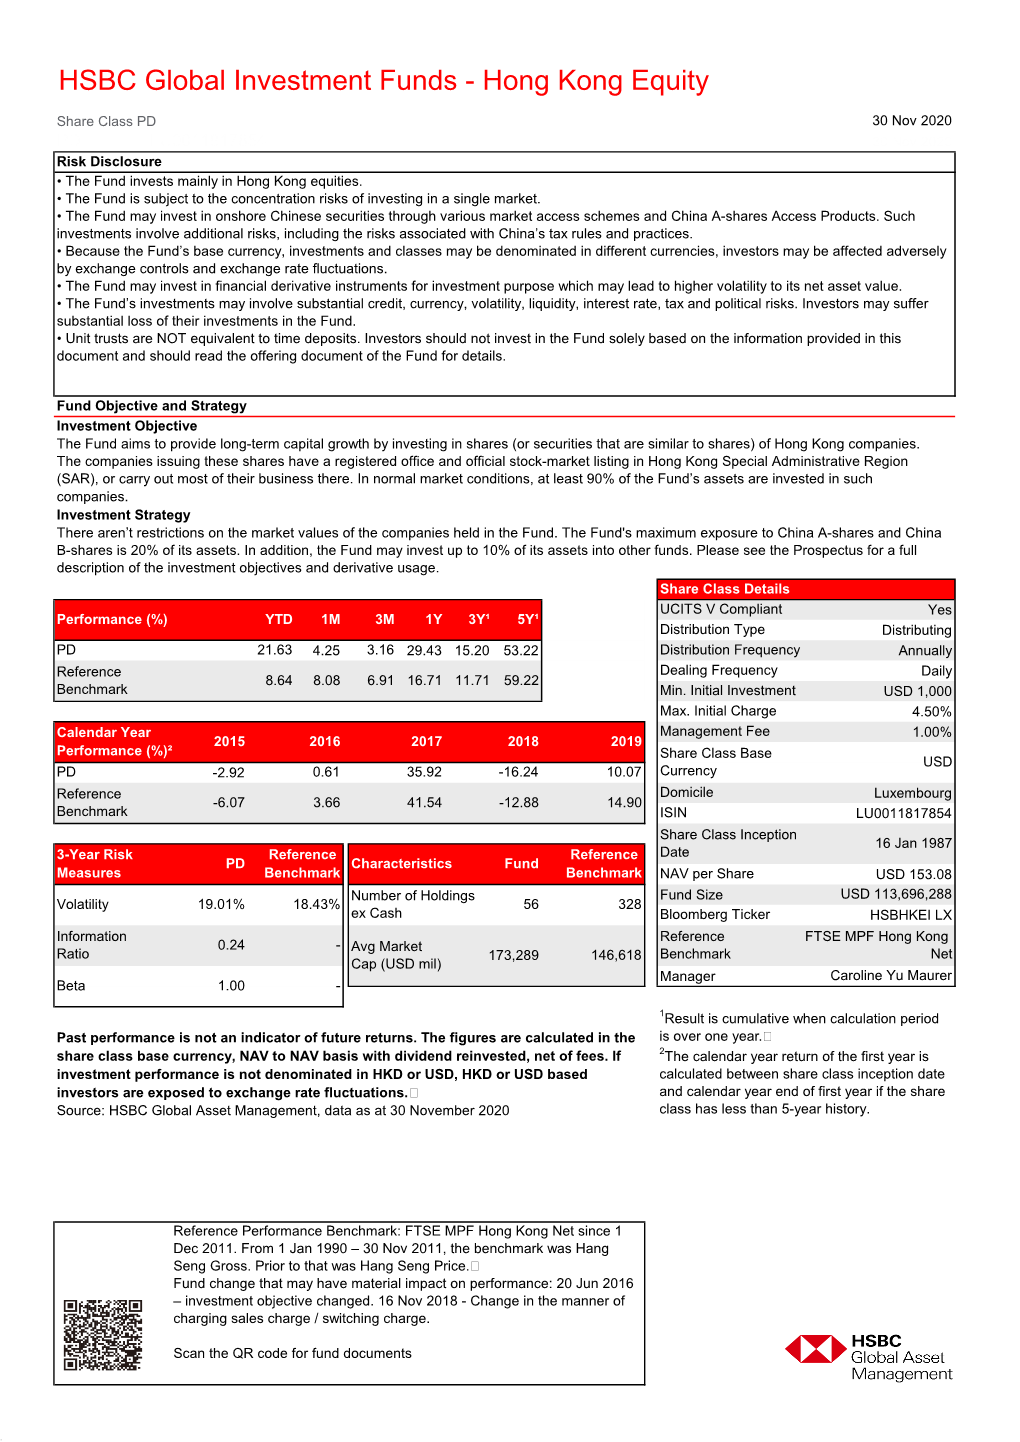 HSBC Global Investment Funds - Hong Kong Equity